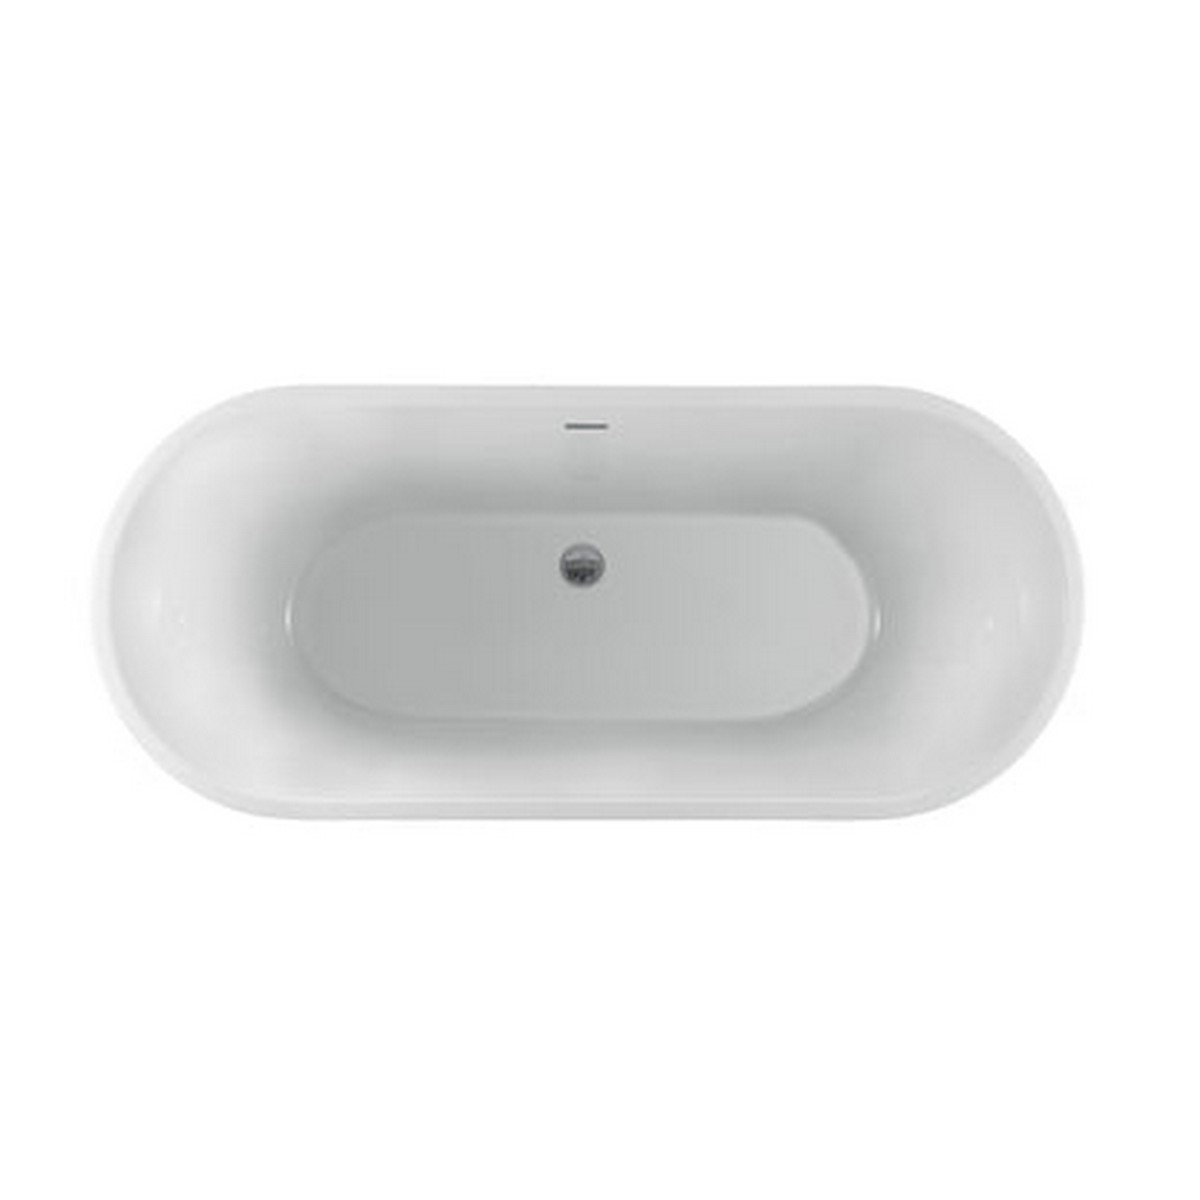 BARCLAY ATSOVN67FIG RADCLIFF 67 INCH ACRYLIC FREESTANDING OVAL SOAKING BATHTUB IN WHITE WITH INTEGRAL DRAIN AND OVERFLOW